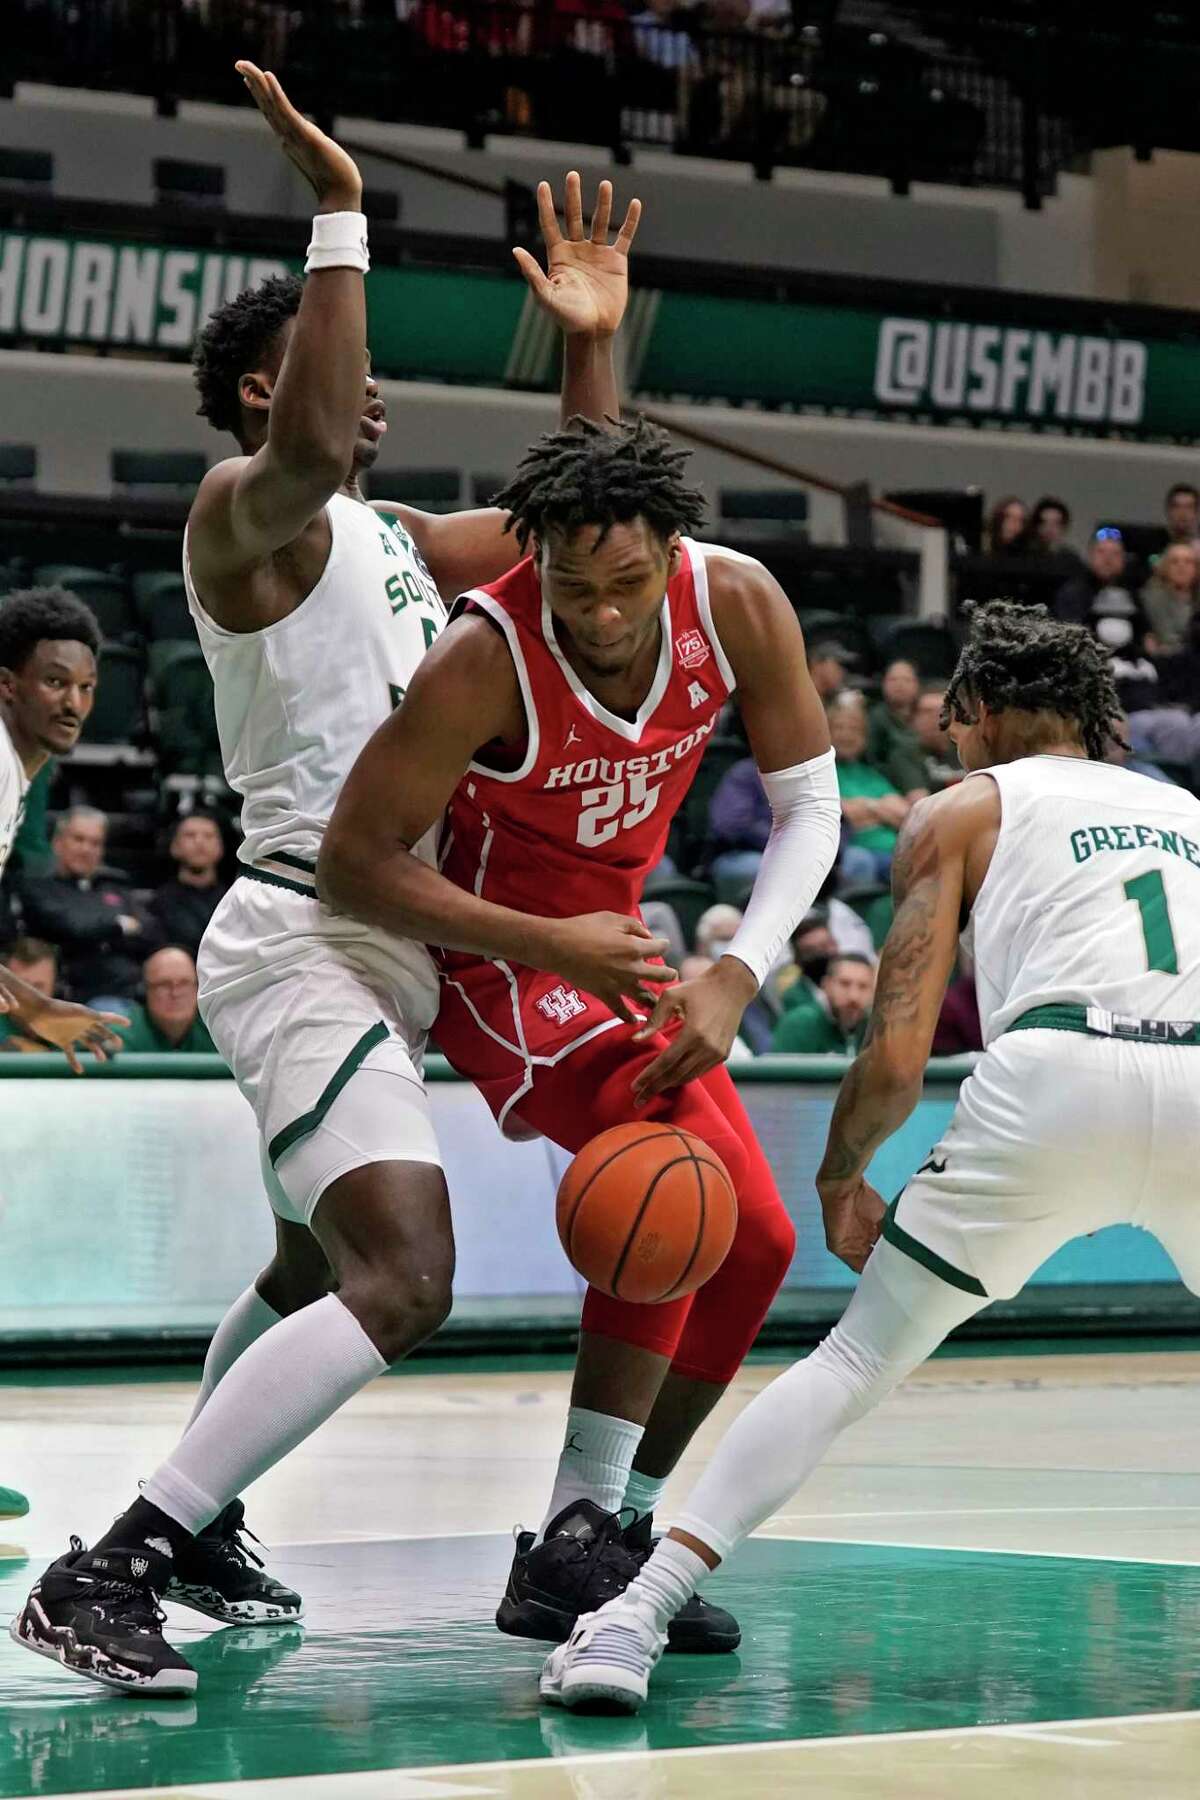 Houston center Josh Carlton (25) loses the ball while being stopped by South Florida center Russel Tchewa (54) and guard Javon Greene (1) during the first half of an NCAA college basketball game Wednesday, Jan. 5, 2022, in Tampa, Fla. (AP Photo/Chris O'Meara)